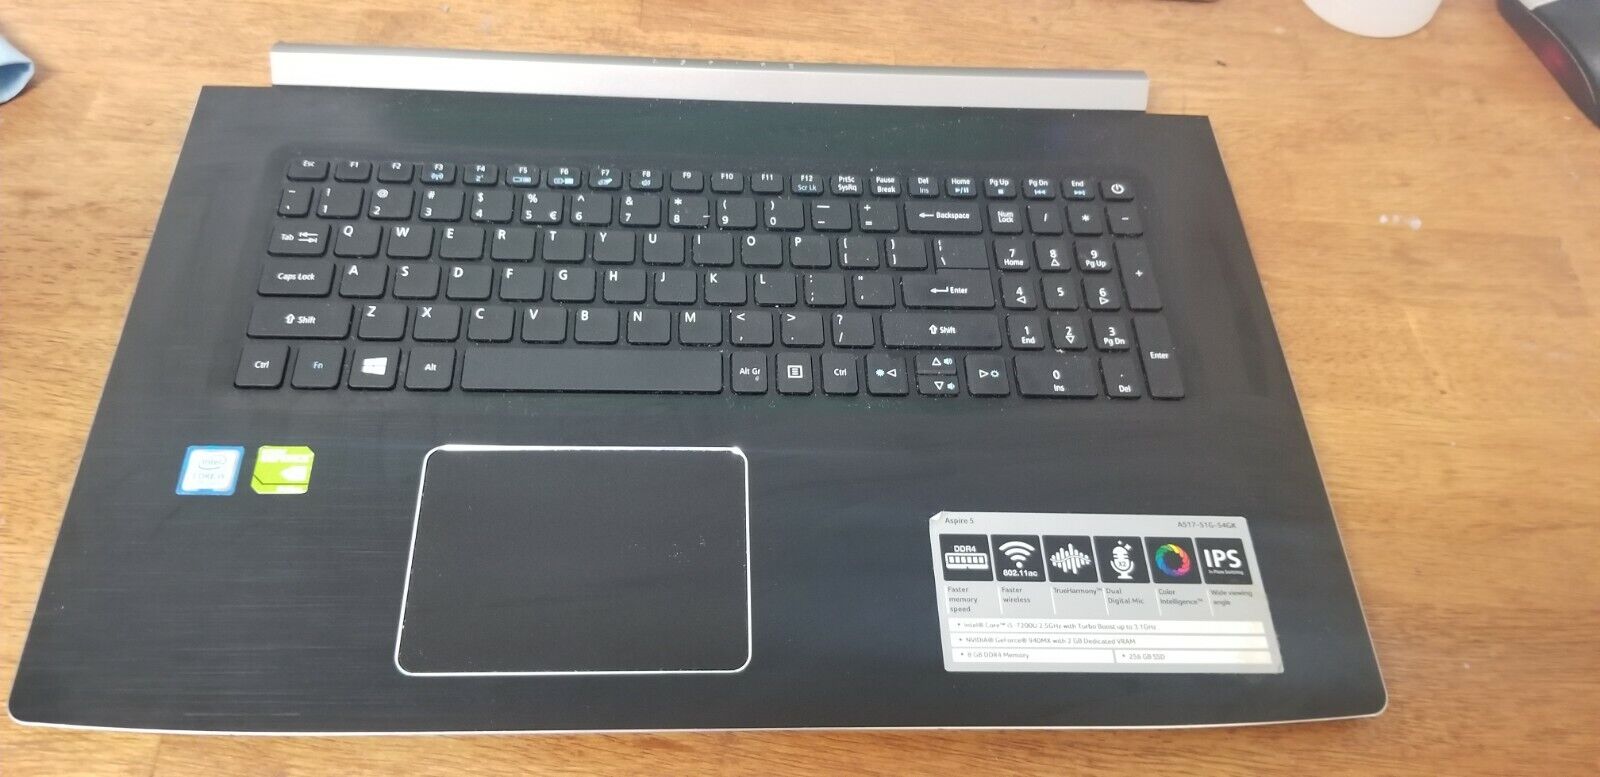  Acer Aspire A517-51 Palmrest Cover AM24C000100H7920 Keyboard, touch pad Grade A